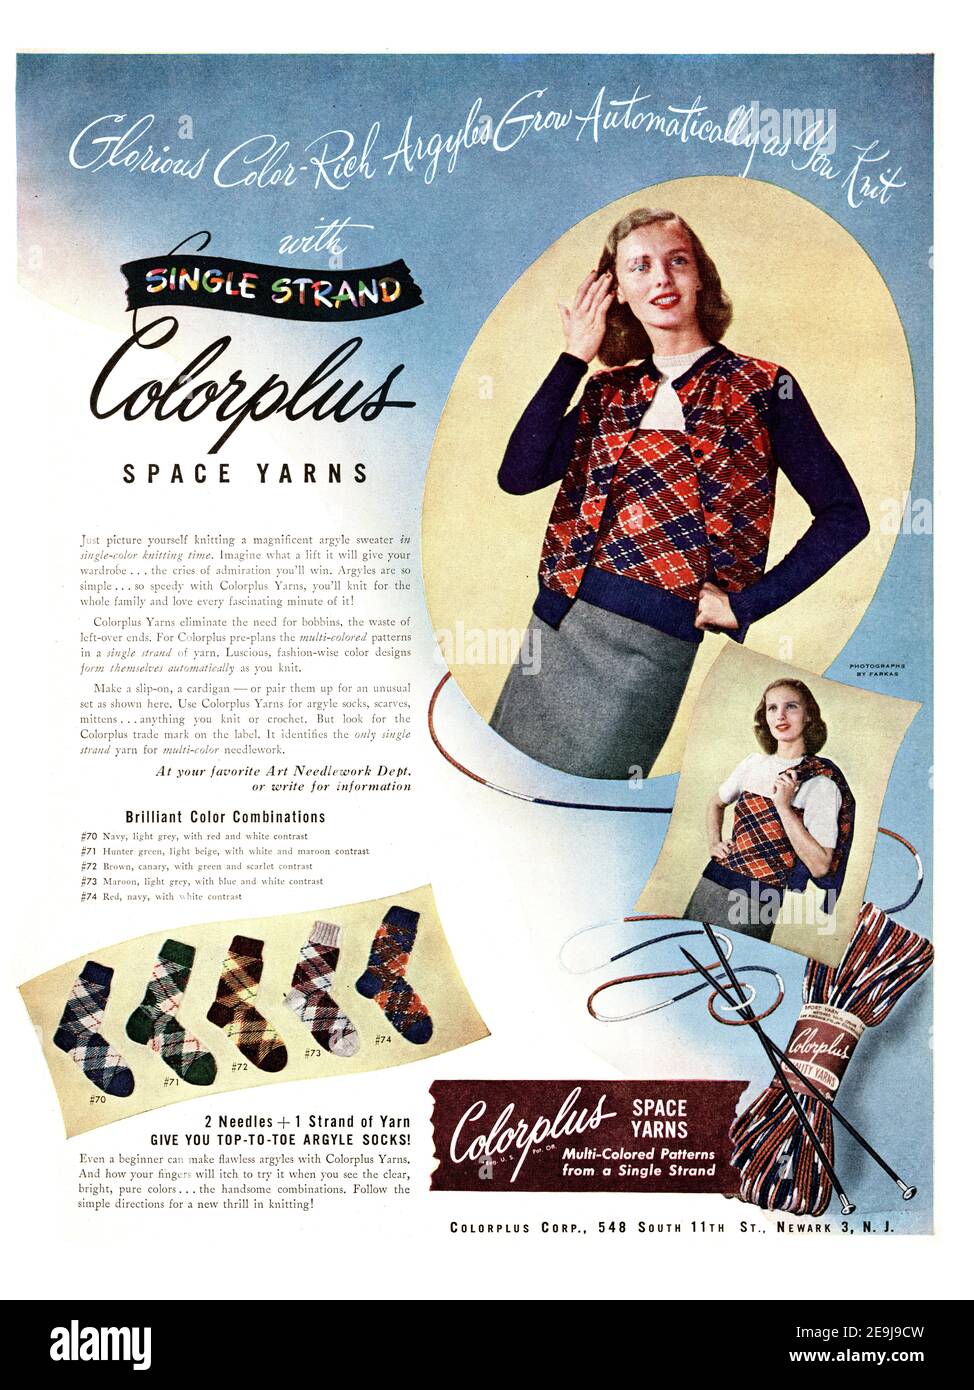 1947 Colorplus Space Yarns 'Single Stand' Advertisement, retouched and restored, A3+, poster quality 600dpi Stock Photo